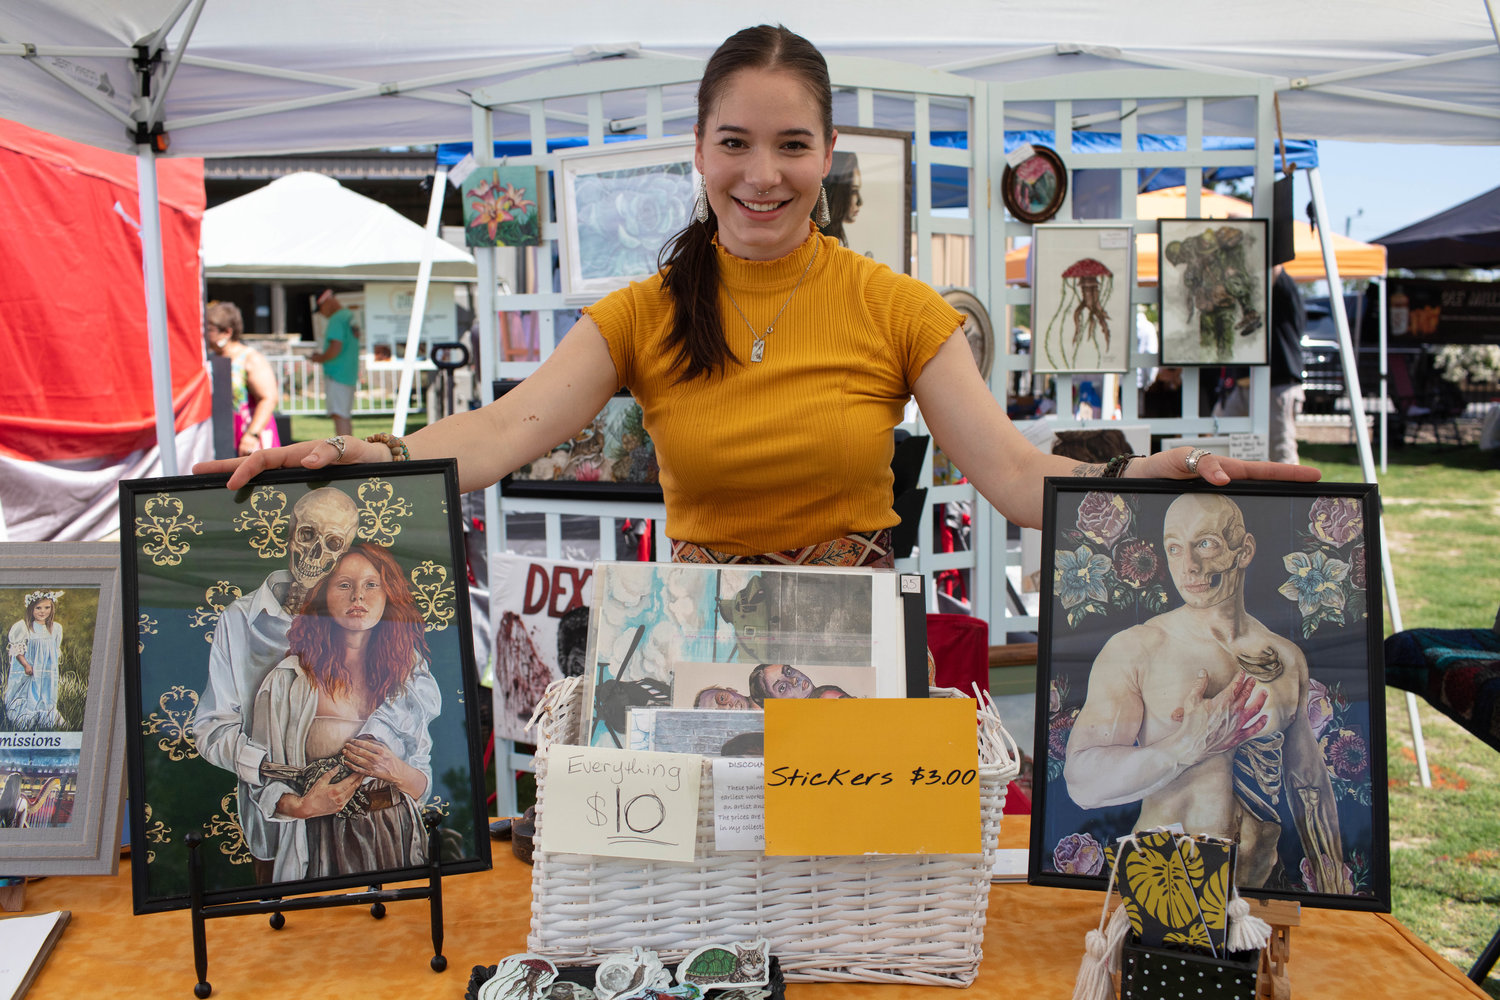 Artist Naomi Raber of Little Yellow Book Artwork shows off a few of her beautiful works for sale at her booth amongst the vendors at Dirtbag Ales.